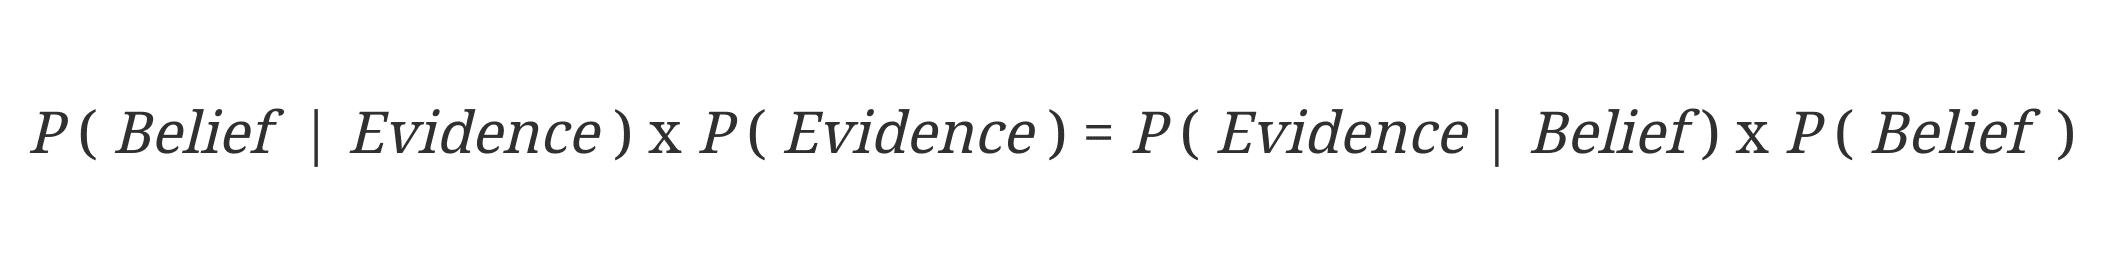 Bayes-Theorem-Linear